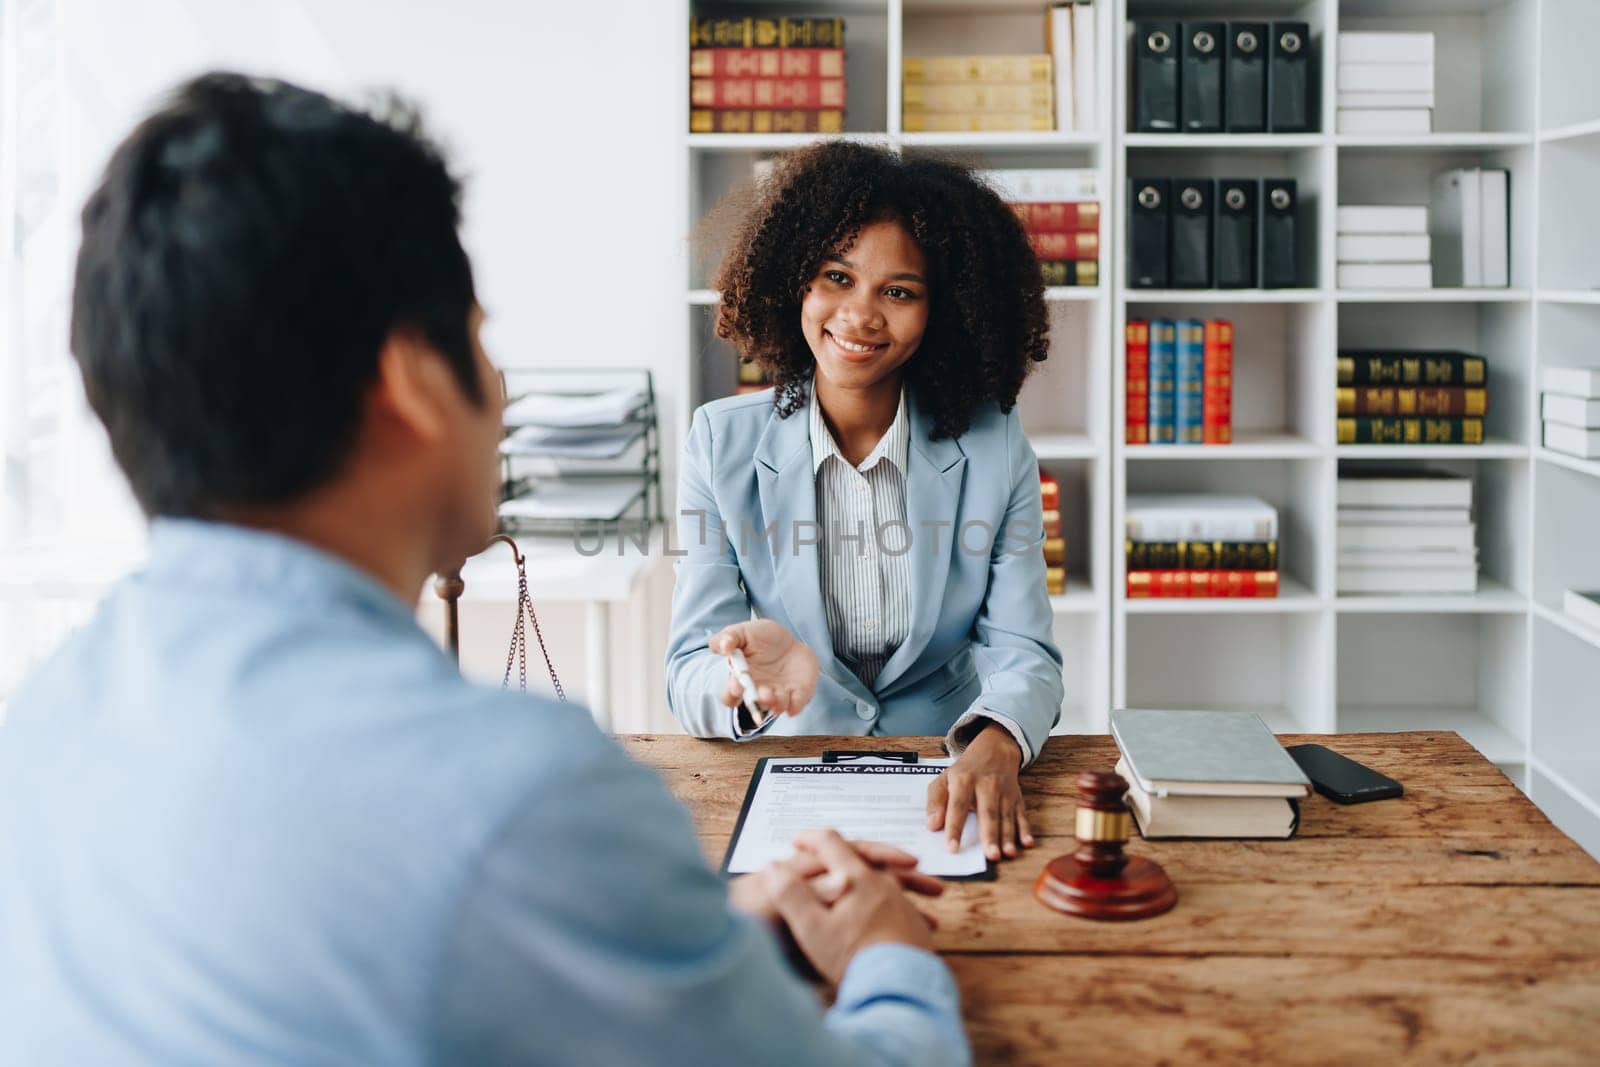 african american attorney, lawyers discussing contract or business agreement at law firm office, Business people making deal document legal, justice advice service concepts.